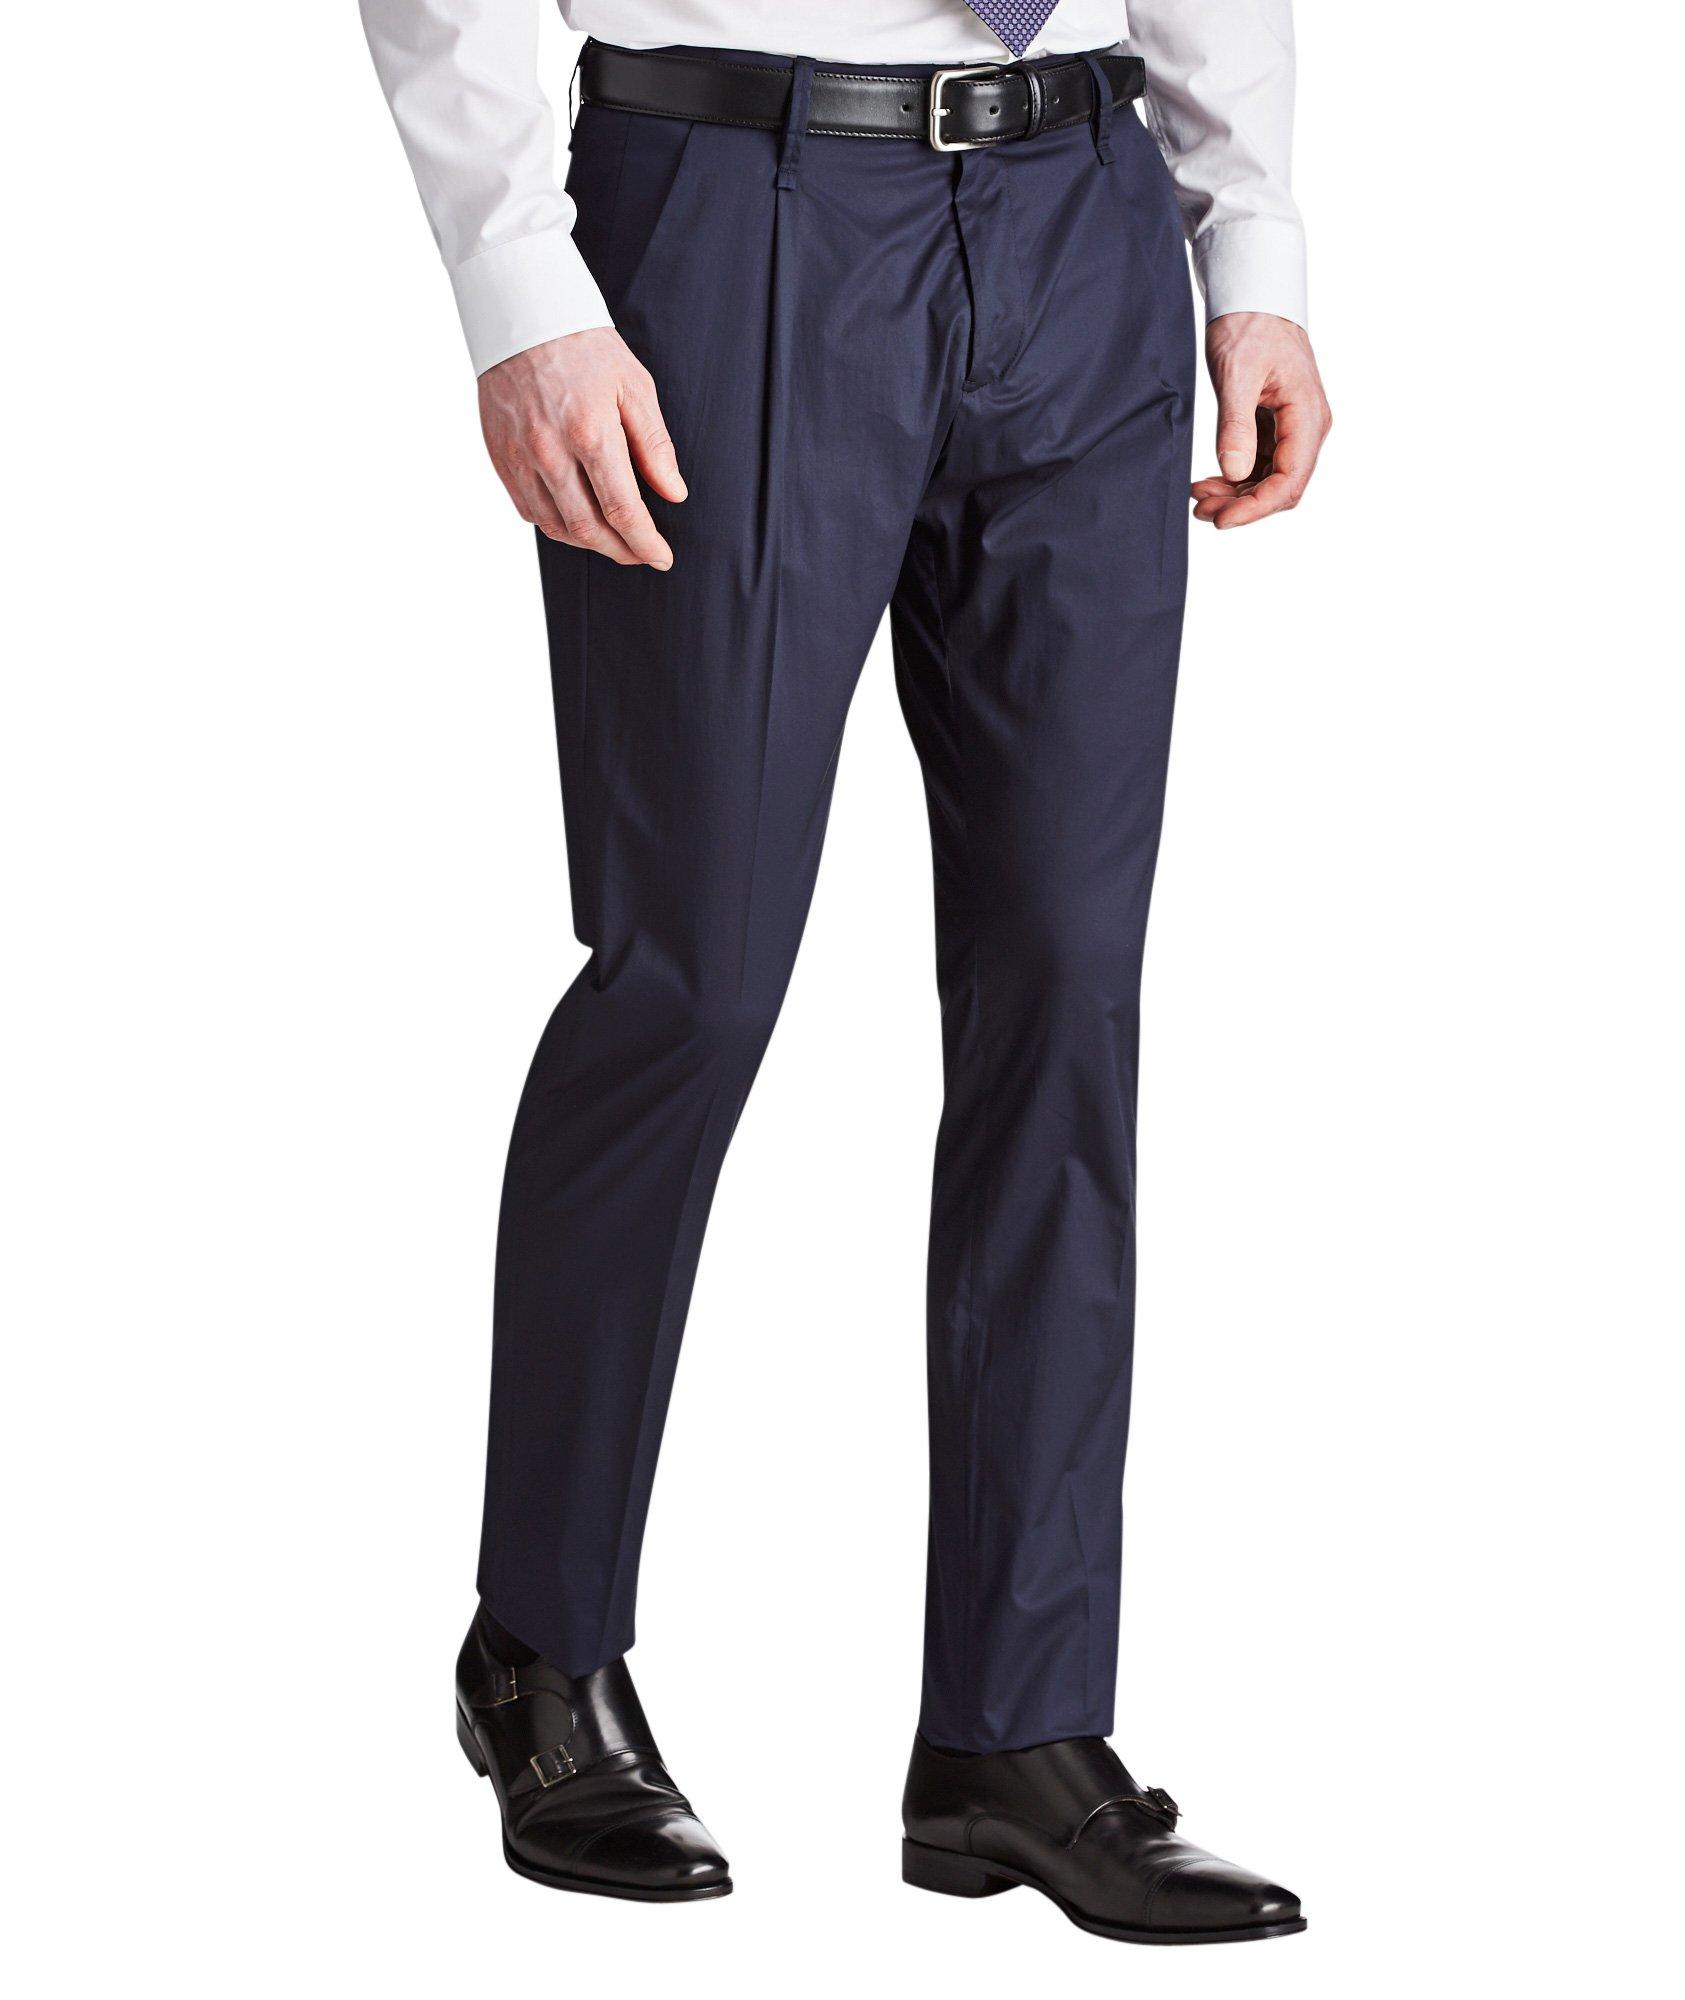 Contemporary Fit Pants image 0